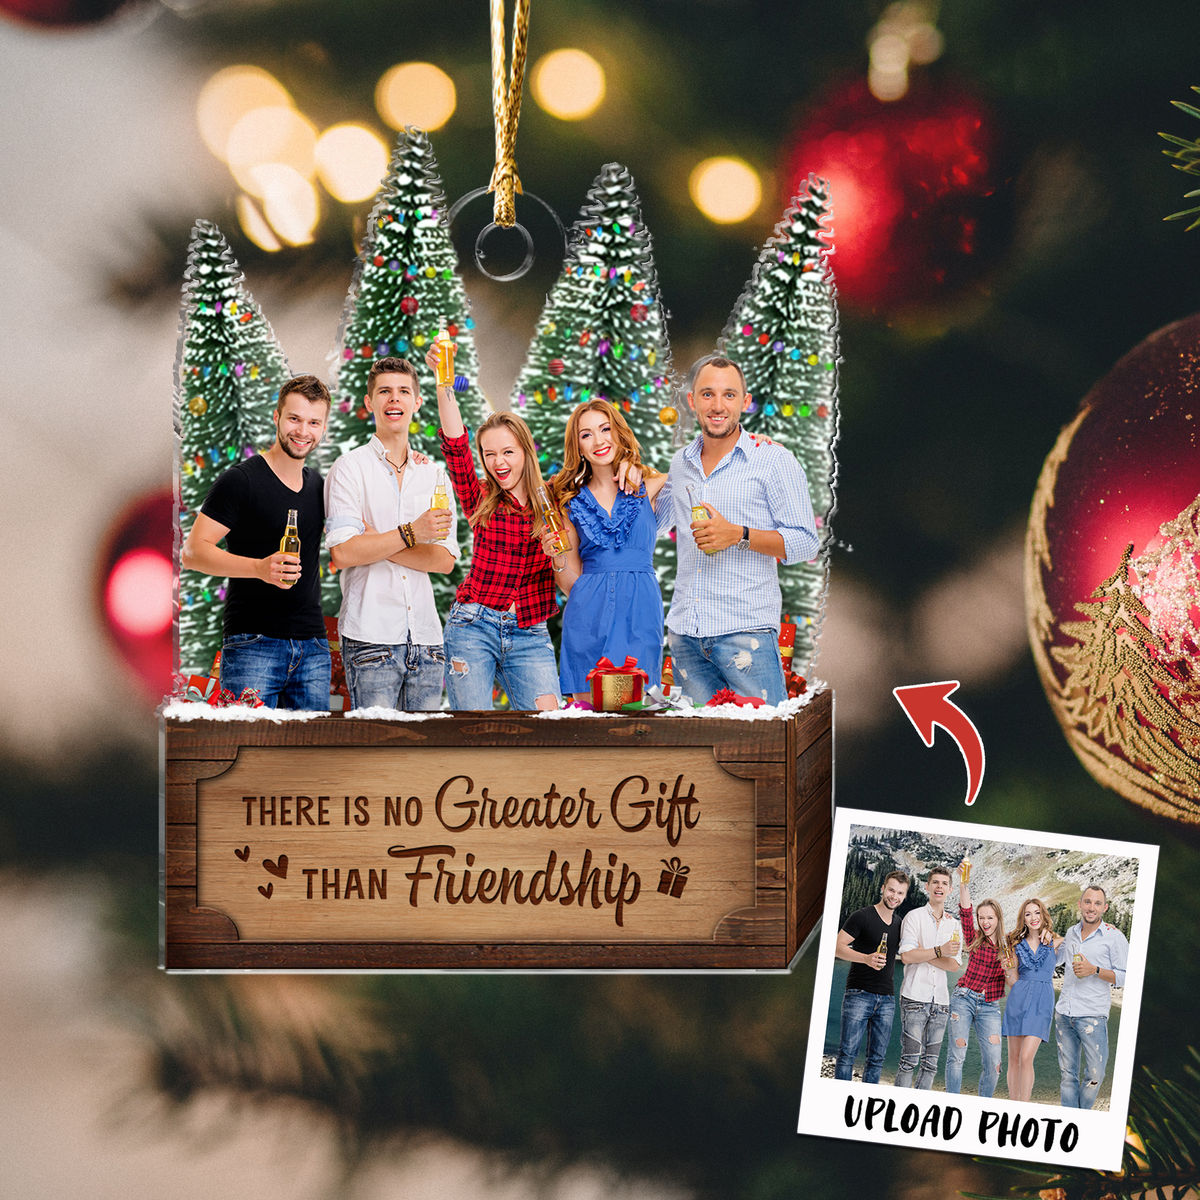 Best Friends Gifts - There is no Greater Gift than Friendship - Christmas Gifts - Custom Ornament from Photo